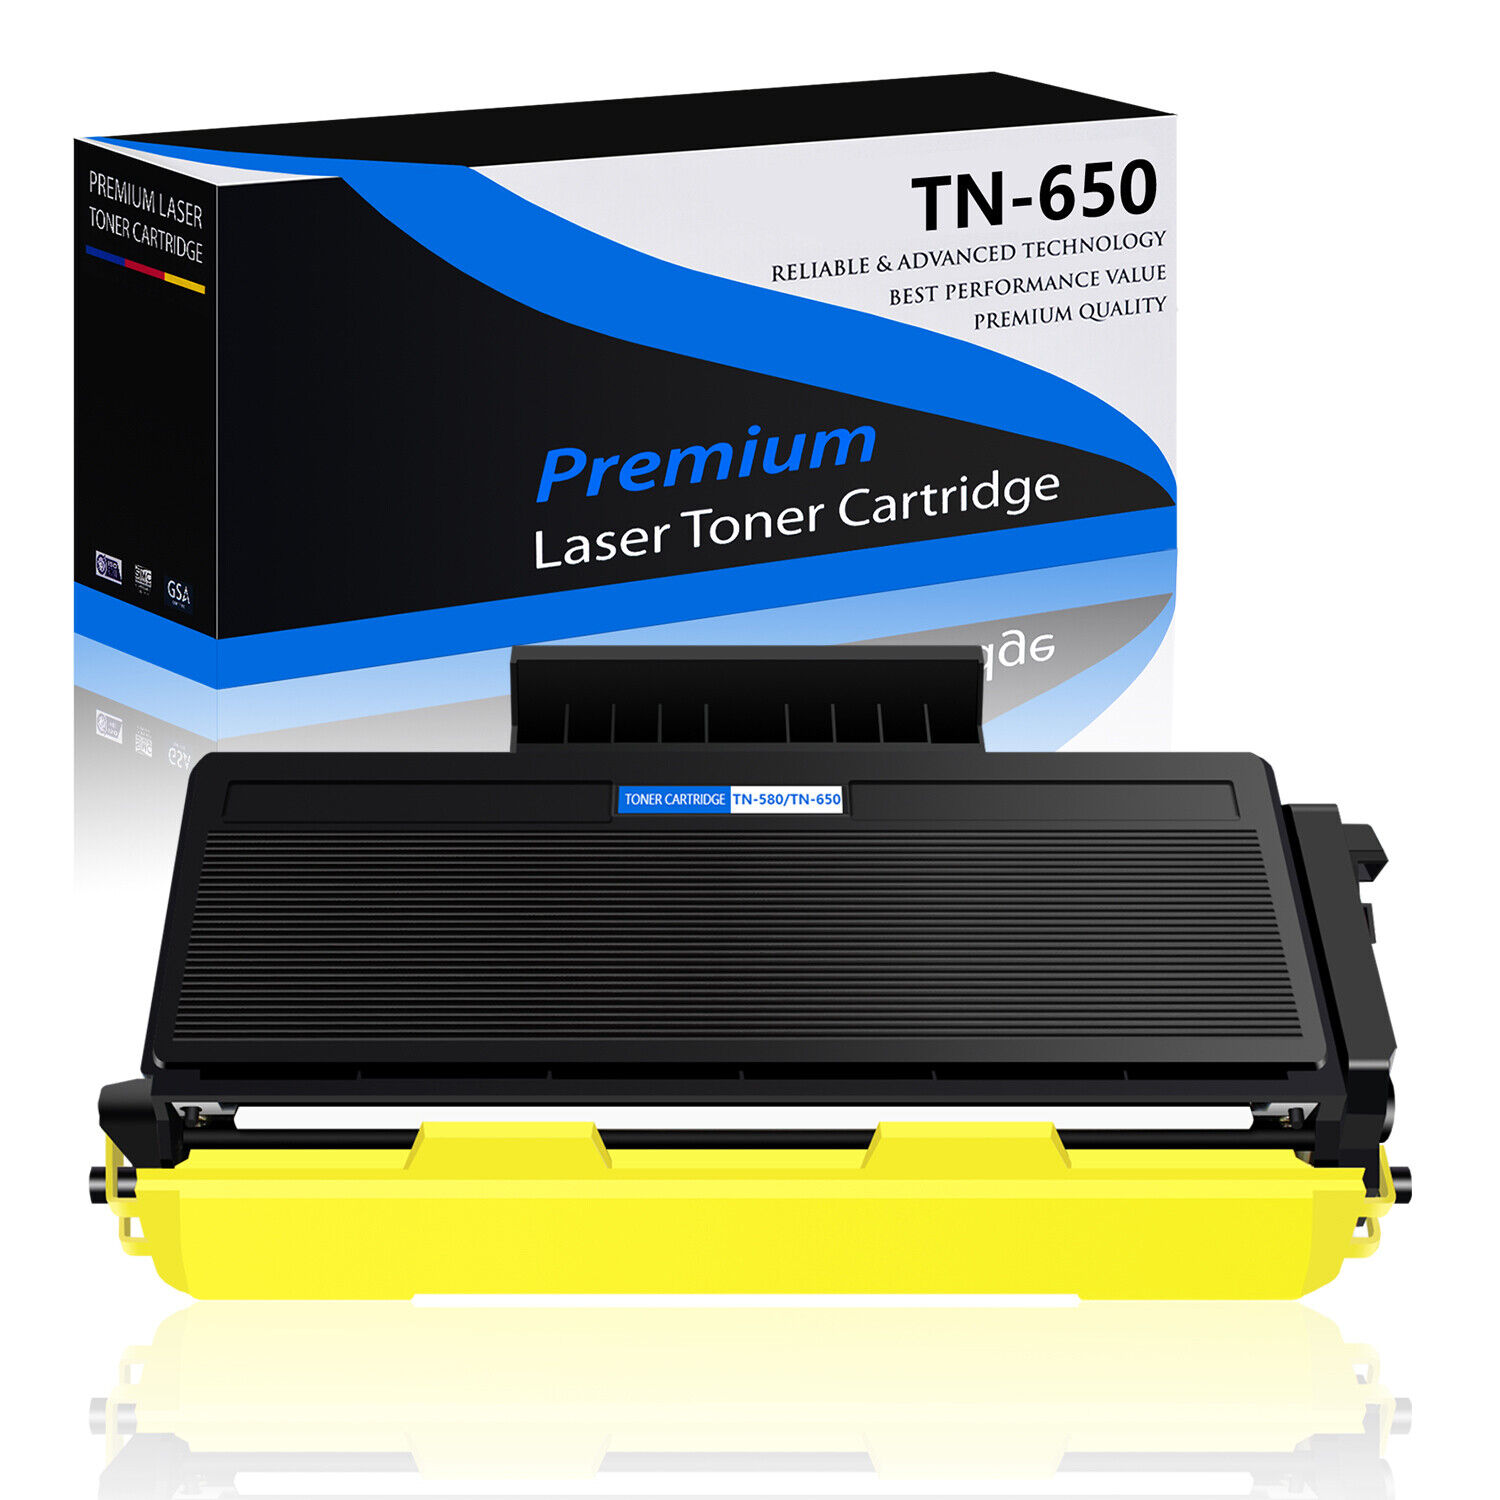 TN650 Toner / DR620 Drum Unit for Brother MFC-8880DN MFC-8890DW MFC-8480DN 8370